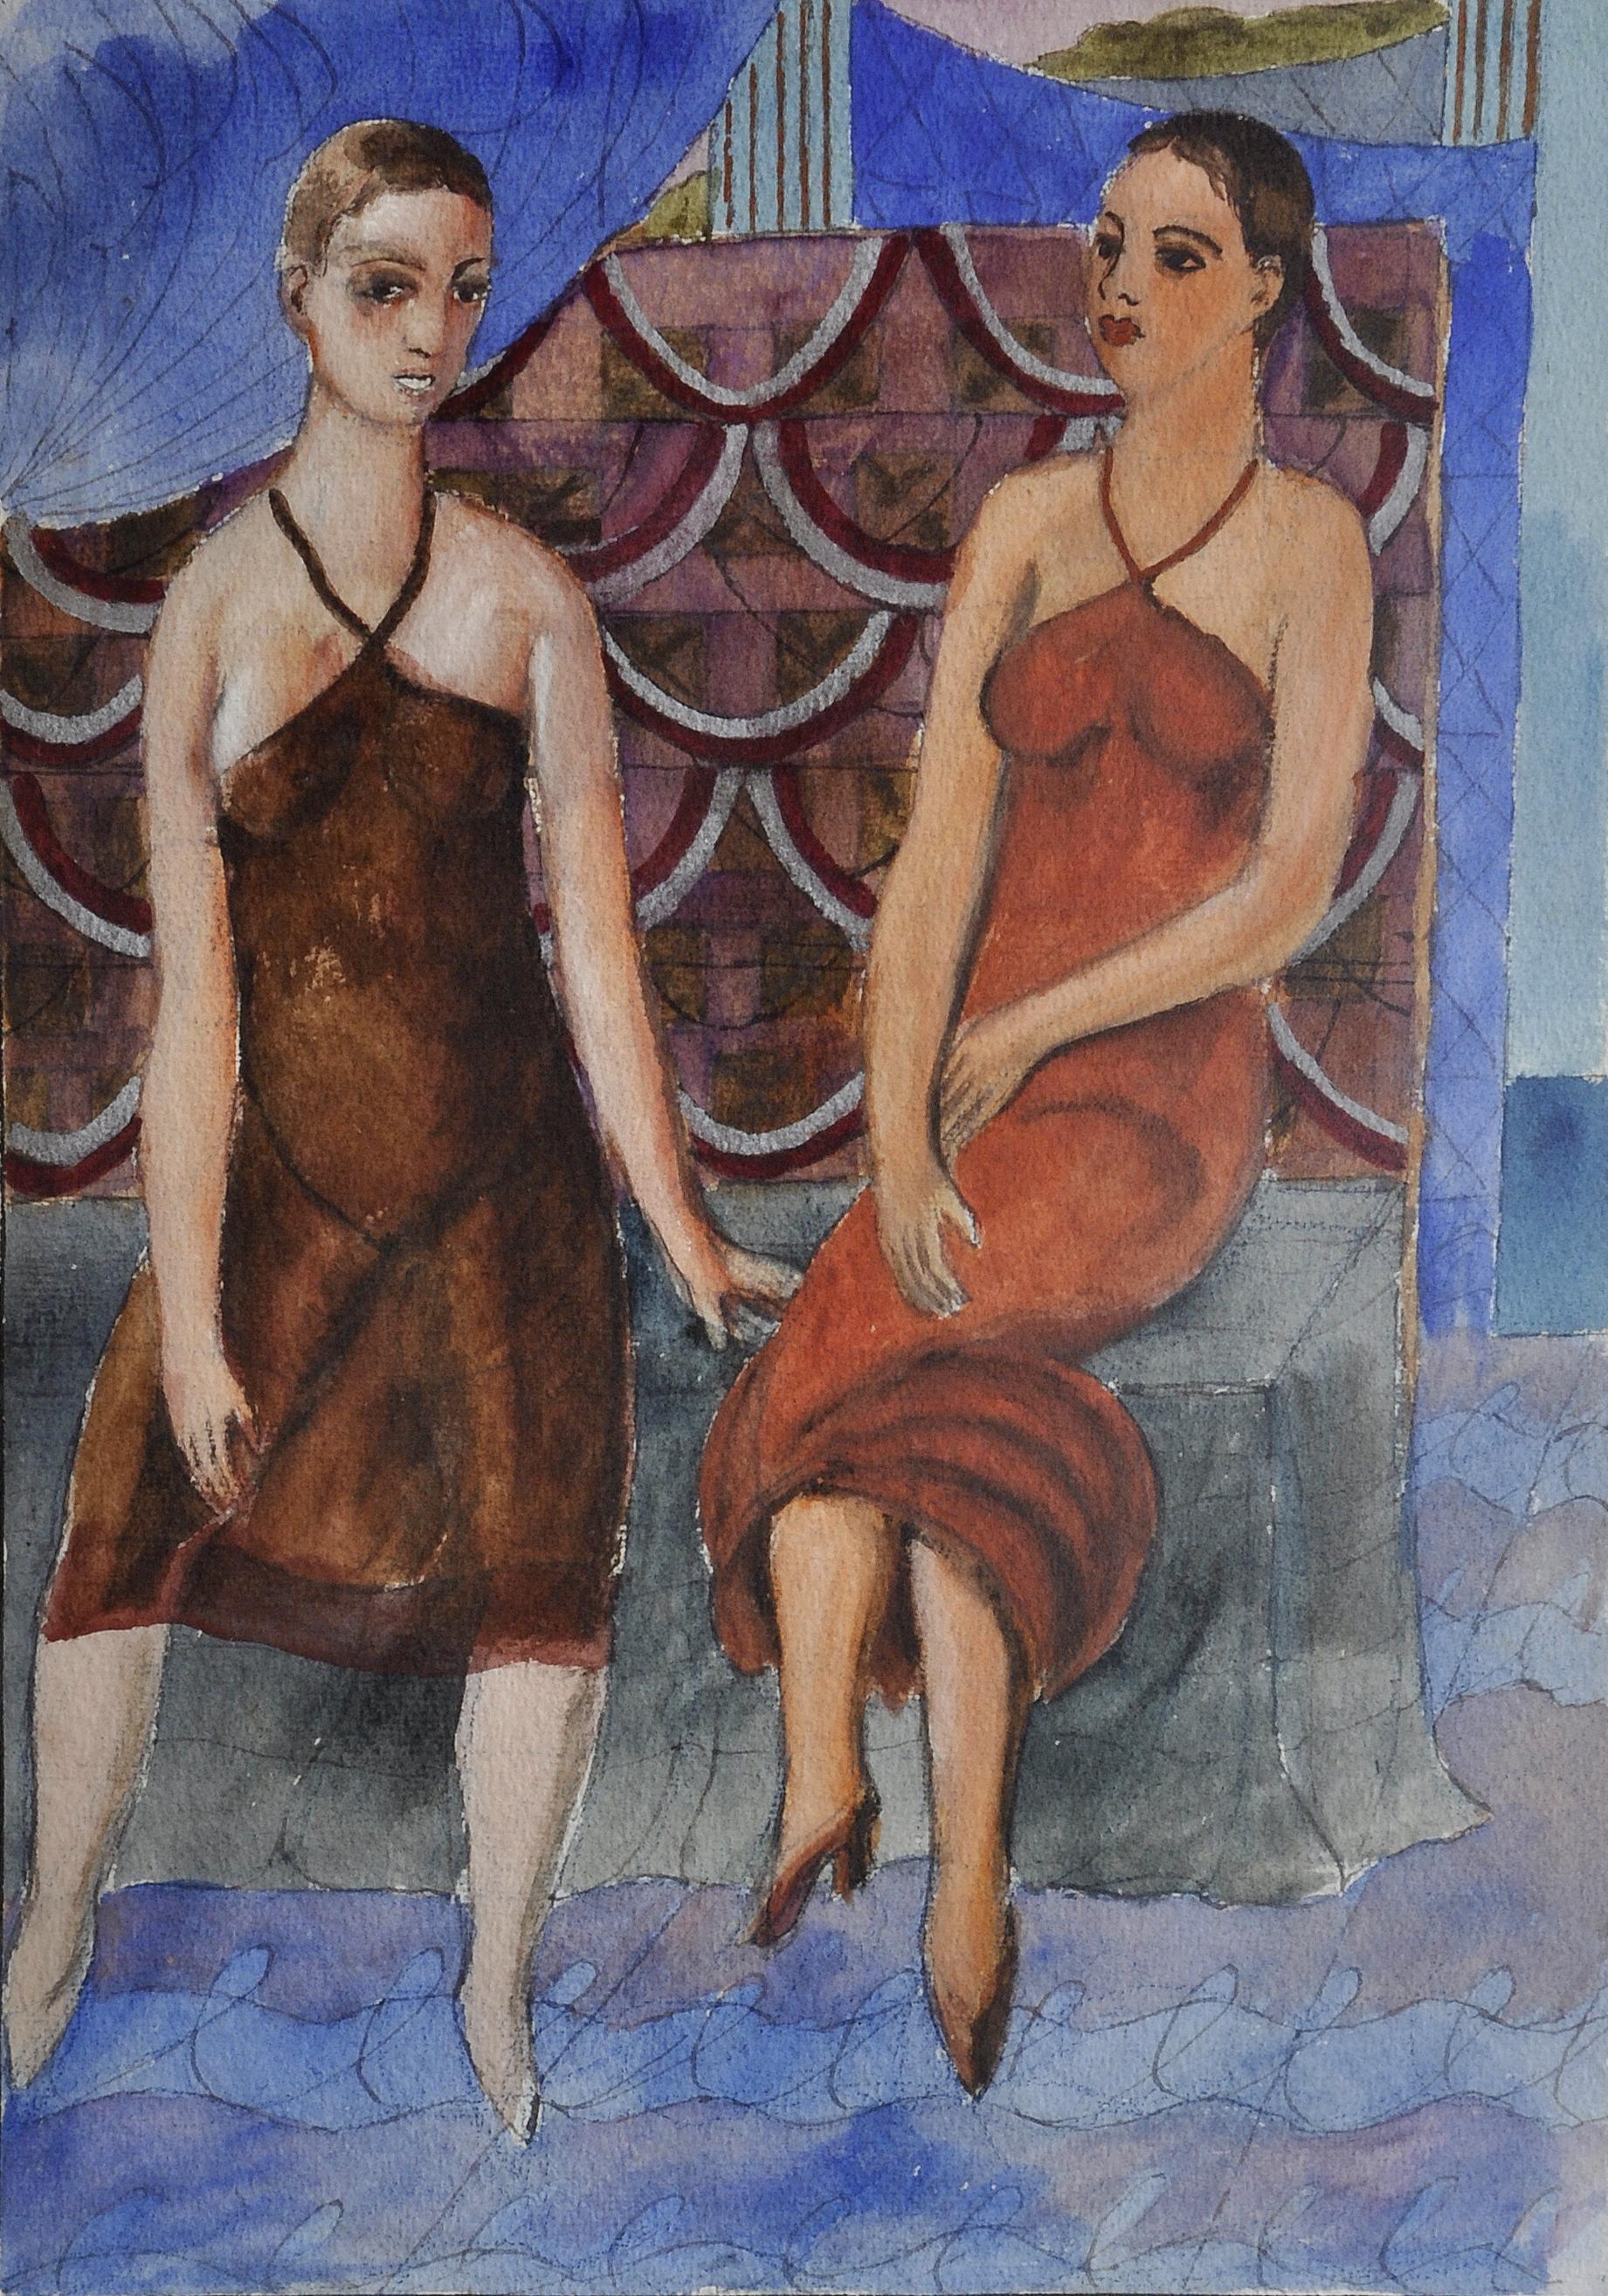 Lady in red and lady in brown. 1935. Paper, watercolor, 35x25 cm